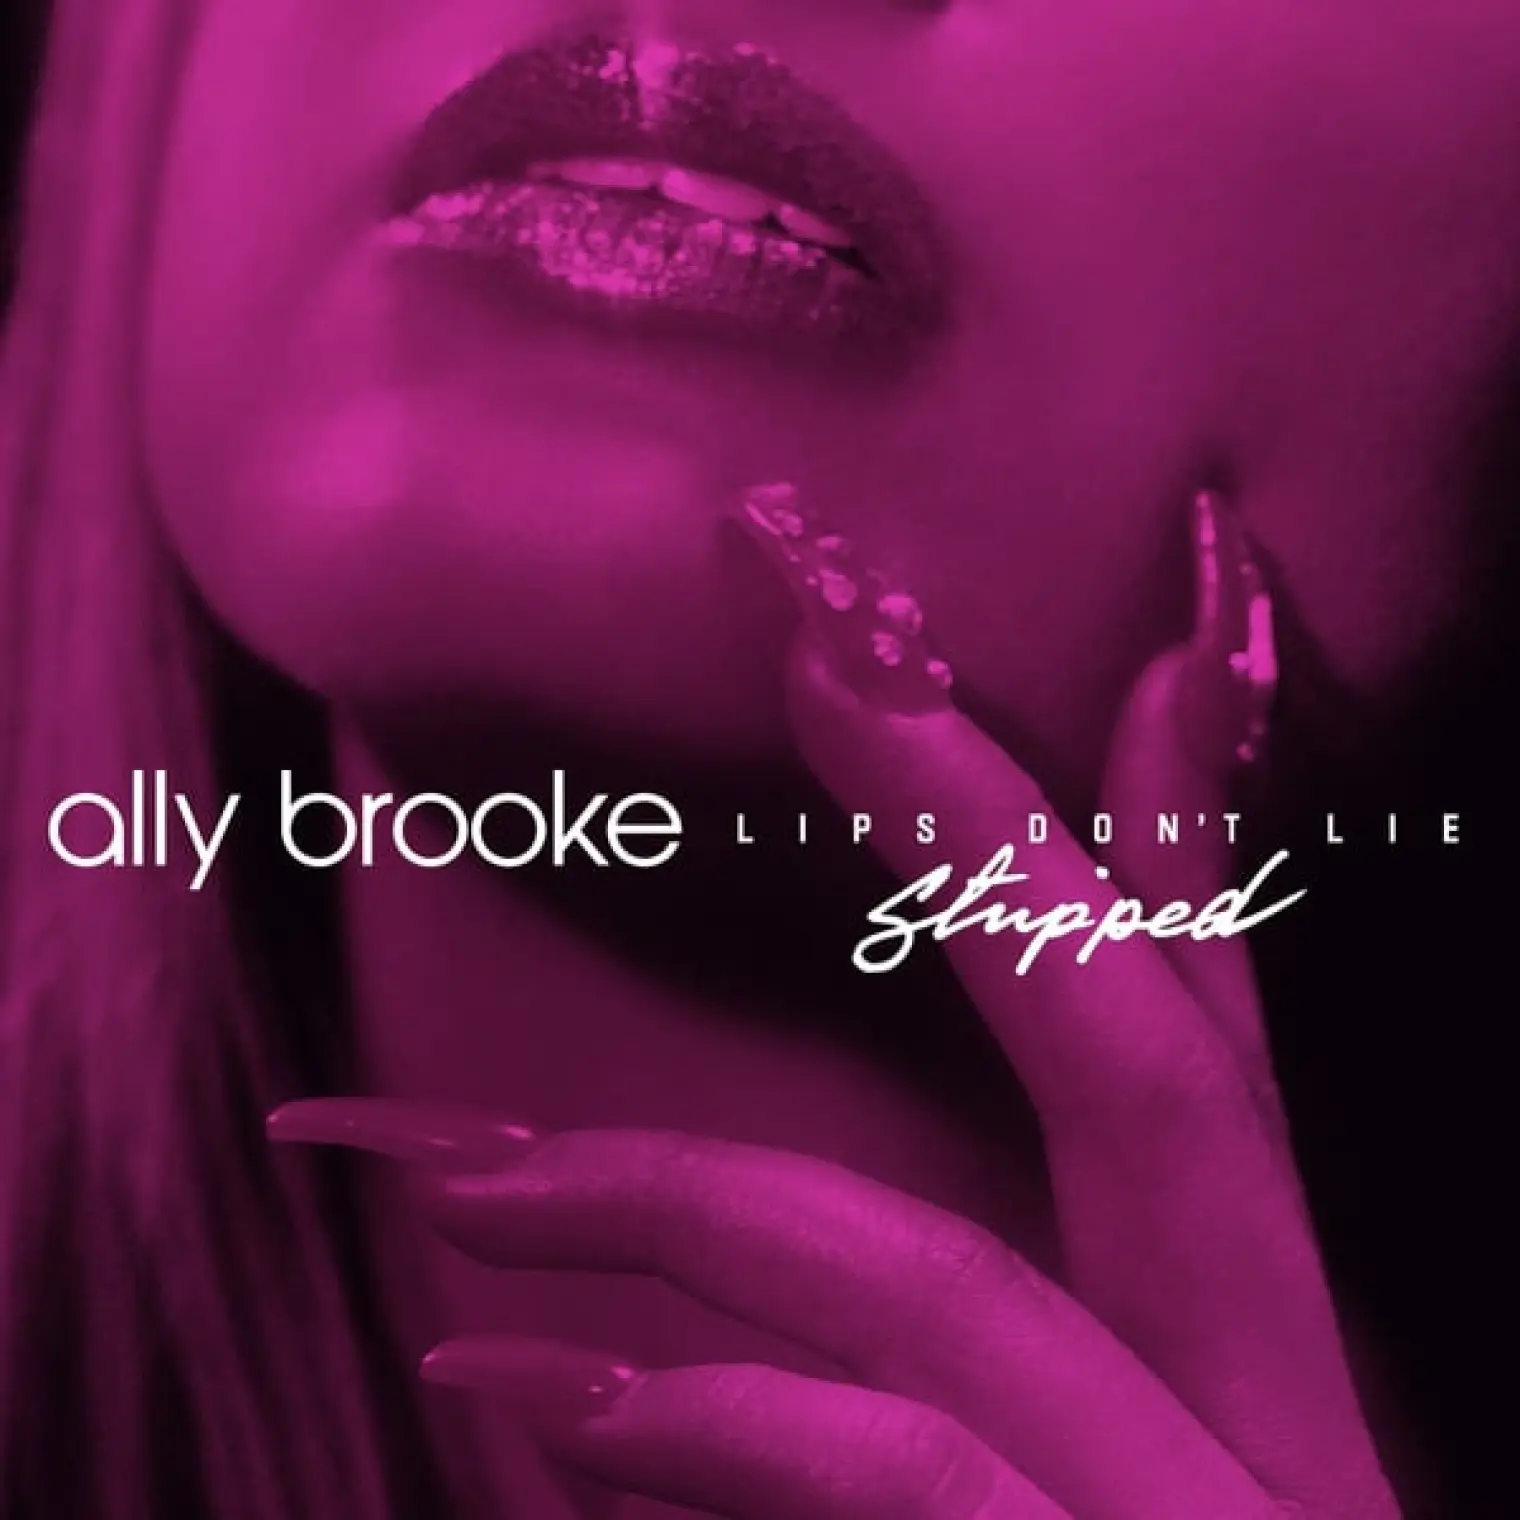 Lips Don't Lie (Stripped) -  Ally Brooke 